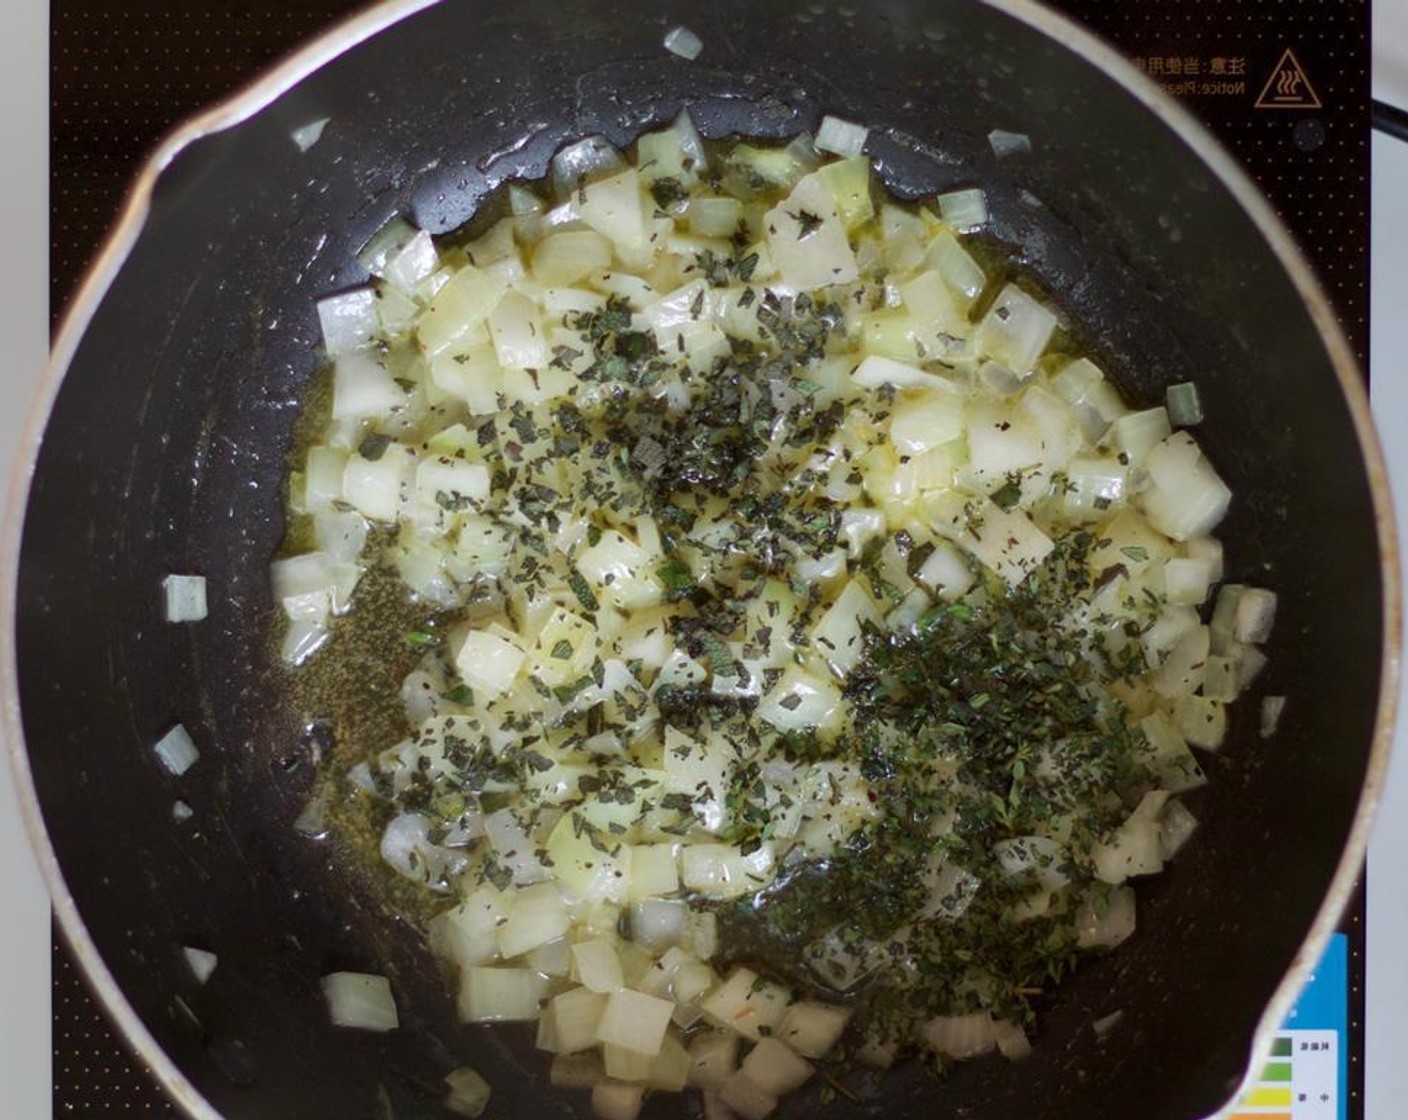 step 5 Melt Unsalted Butter (3 Tbsp) in a large skillet over medium-high heat. Add the minced onion and saute for 3 minutes. Season with Kosher Salt (to taste) and Freshly Ground Black Pepper (to taste). Add in the sage and thyme and cook for a minute.